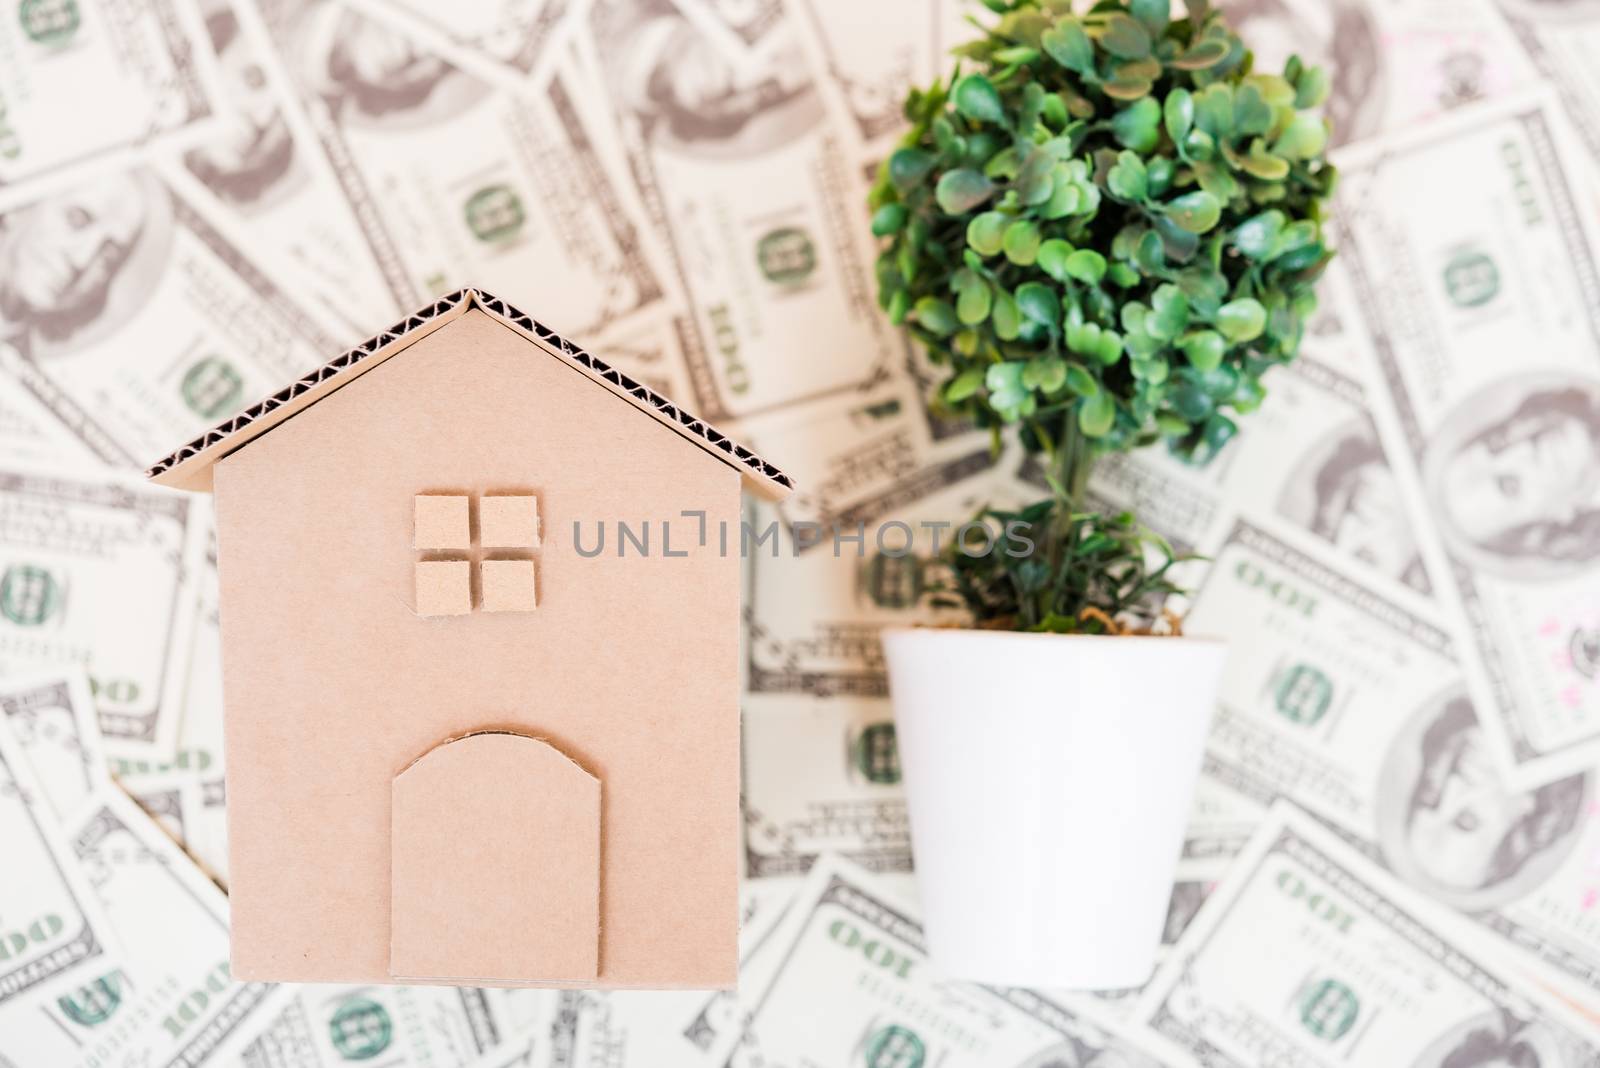 House cardboard model on dollar money, investment currency money concept